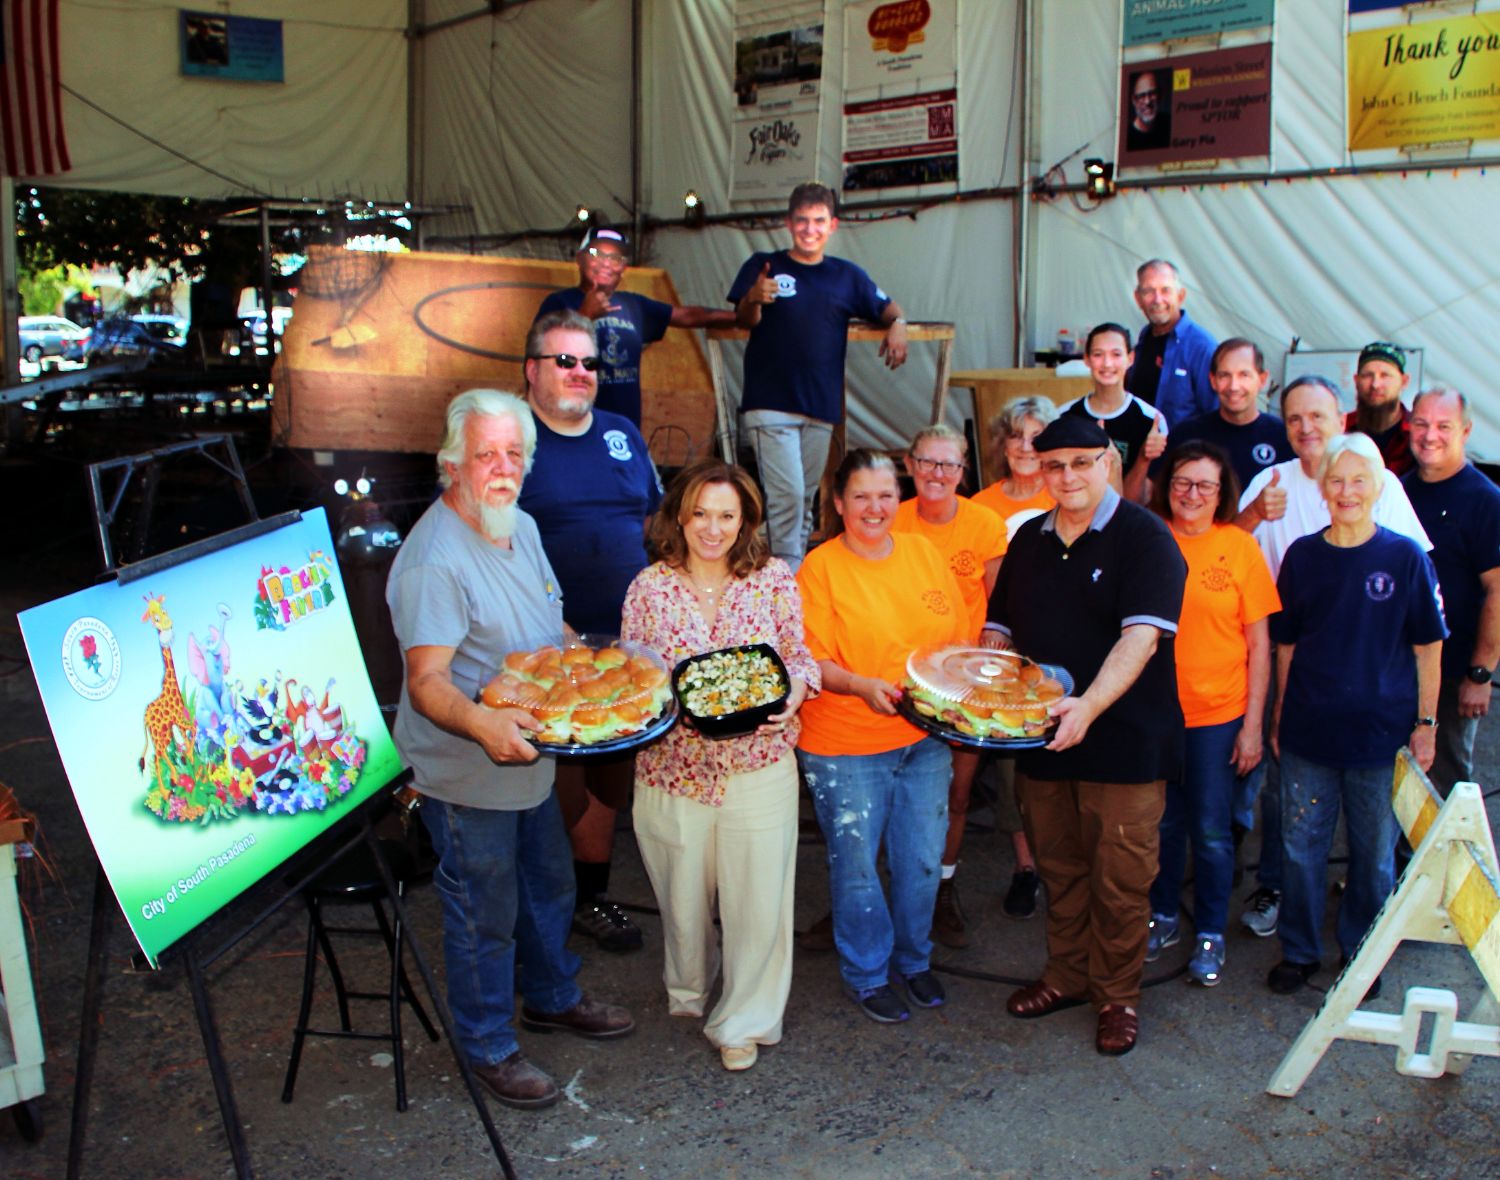 PHOTO: Henk Friezer | The South Pasadenan | Twohey’s Restaurant brings lunch to the South Pasadena Tournament of Roses’ Float work crew on Saturday, Oct. 21 at the float site at the War Memorial Building. Owners Tanya Christos (front, second from left) and Greg Mallis (front, wearing black shirt and holding platter) are providing complementary lunches for the crew during the float building and decoration season.